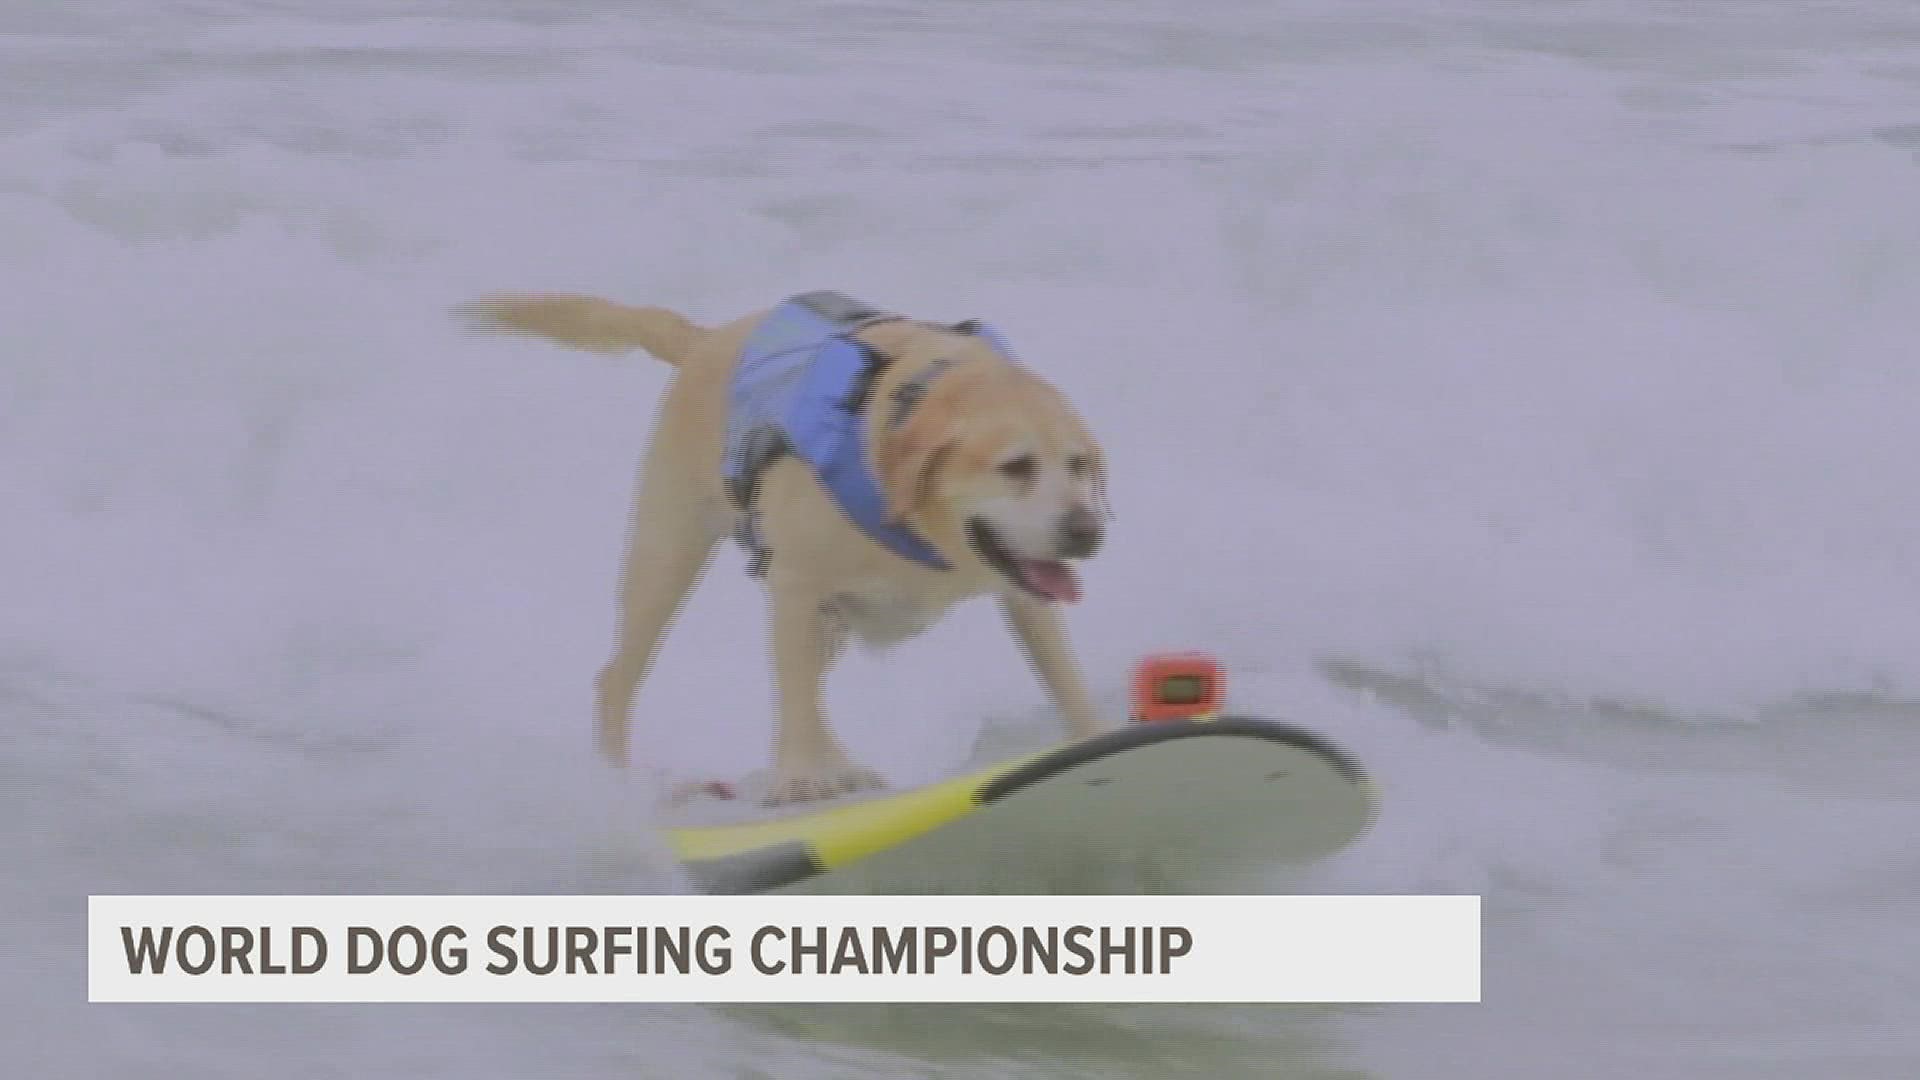 At the World Dog Surfing Championships in Pacifica, California, dogs were judged on multiple factors, including length of ride, confidence and size of the waves.